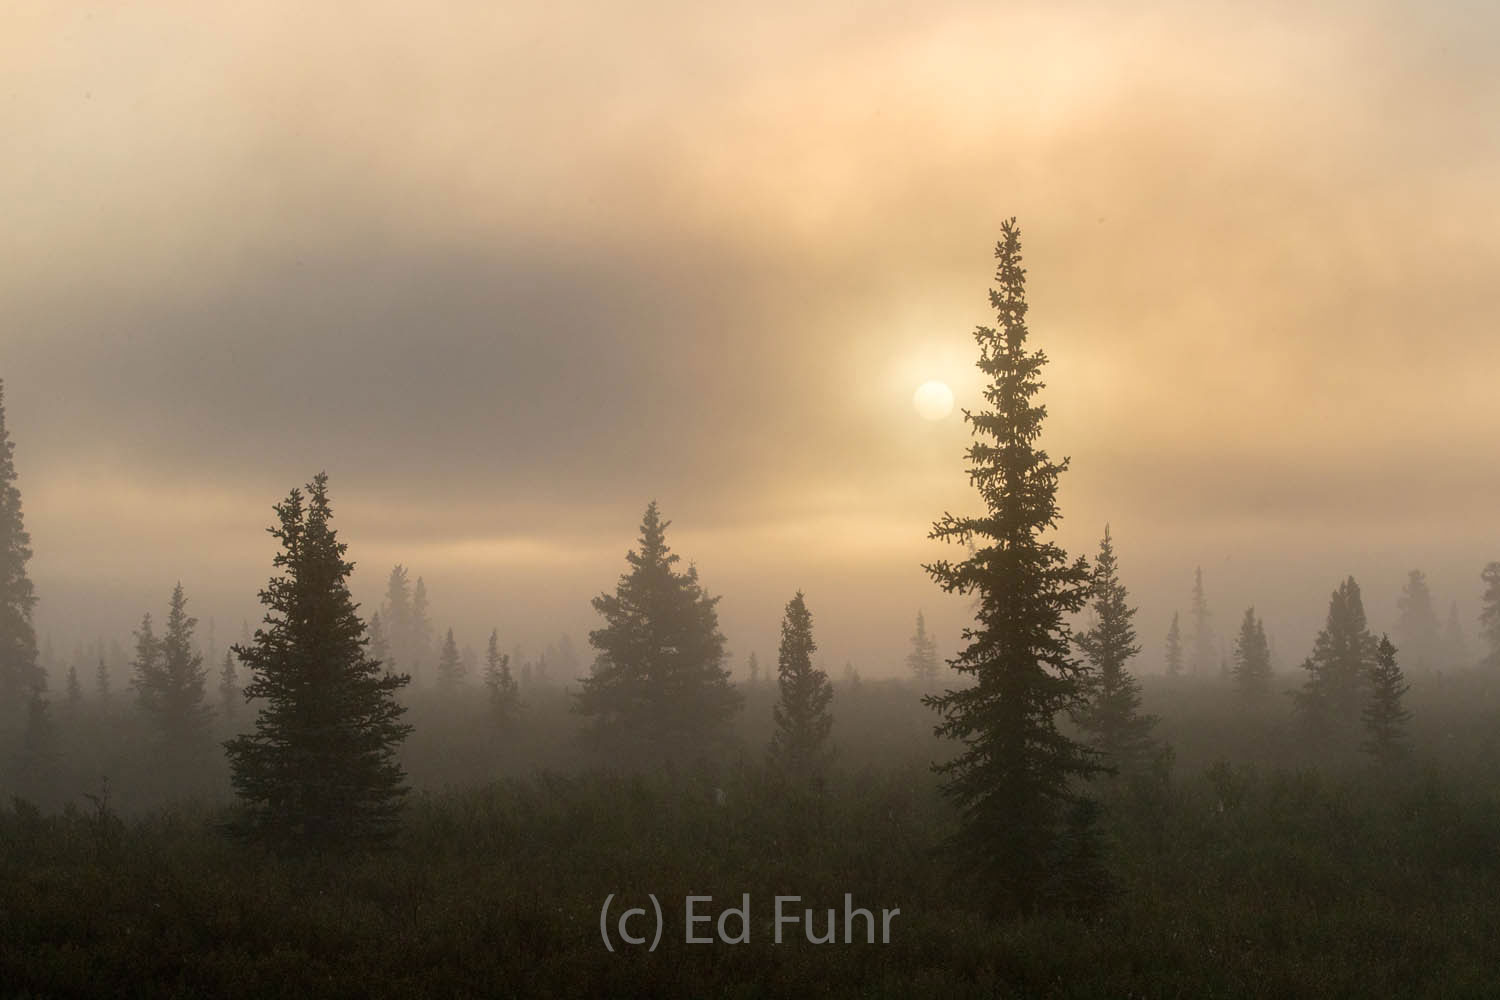 Not particularly common in Denali, fog rises above the river, shrouding the Denali valley and trees.